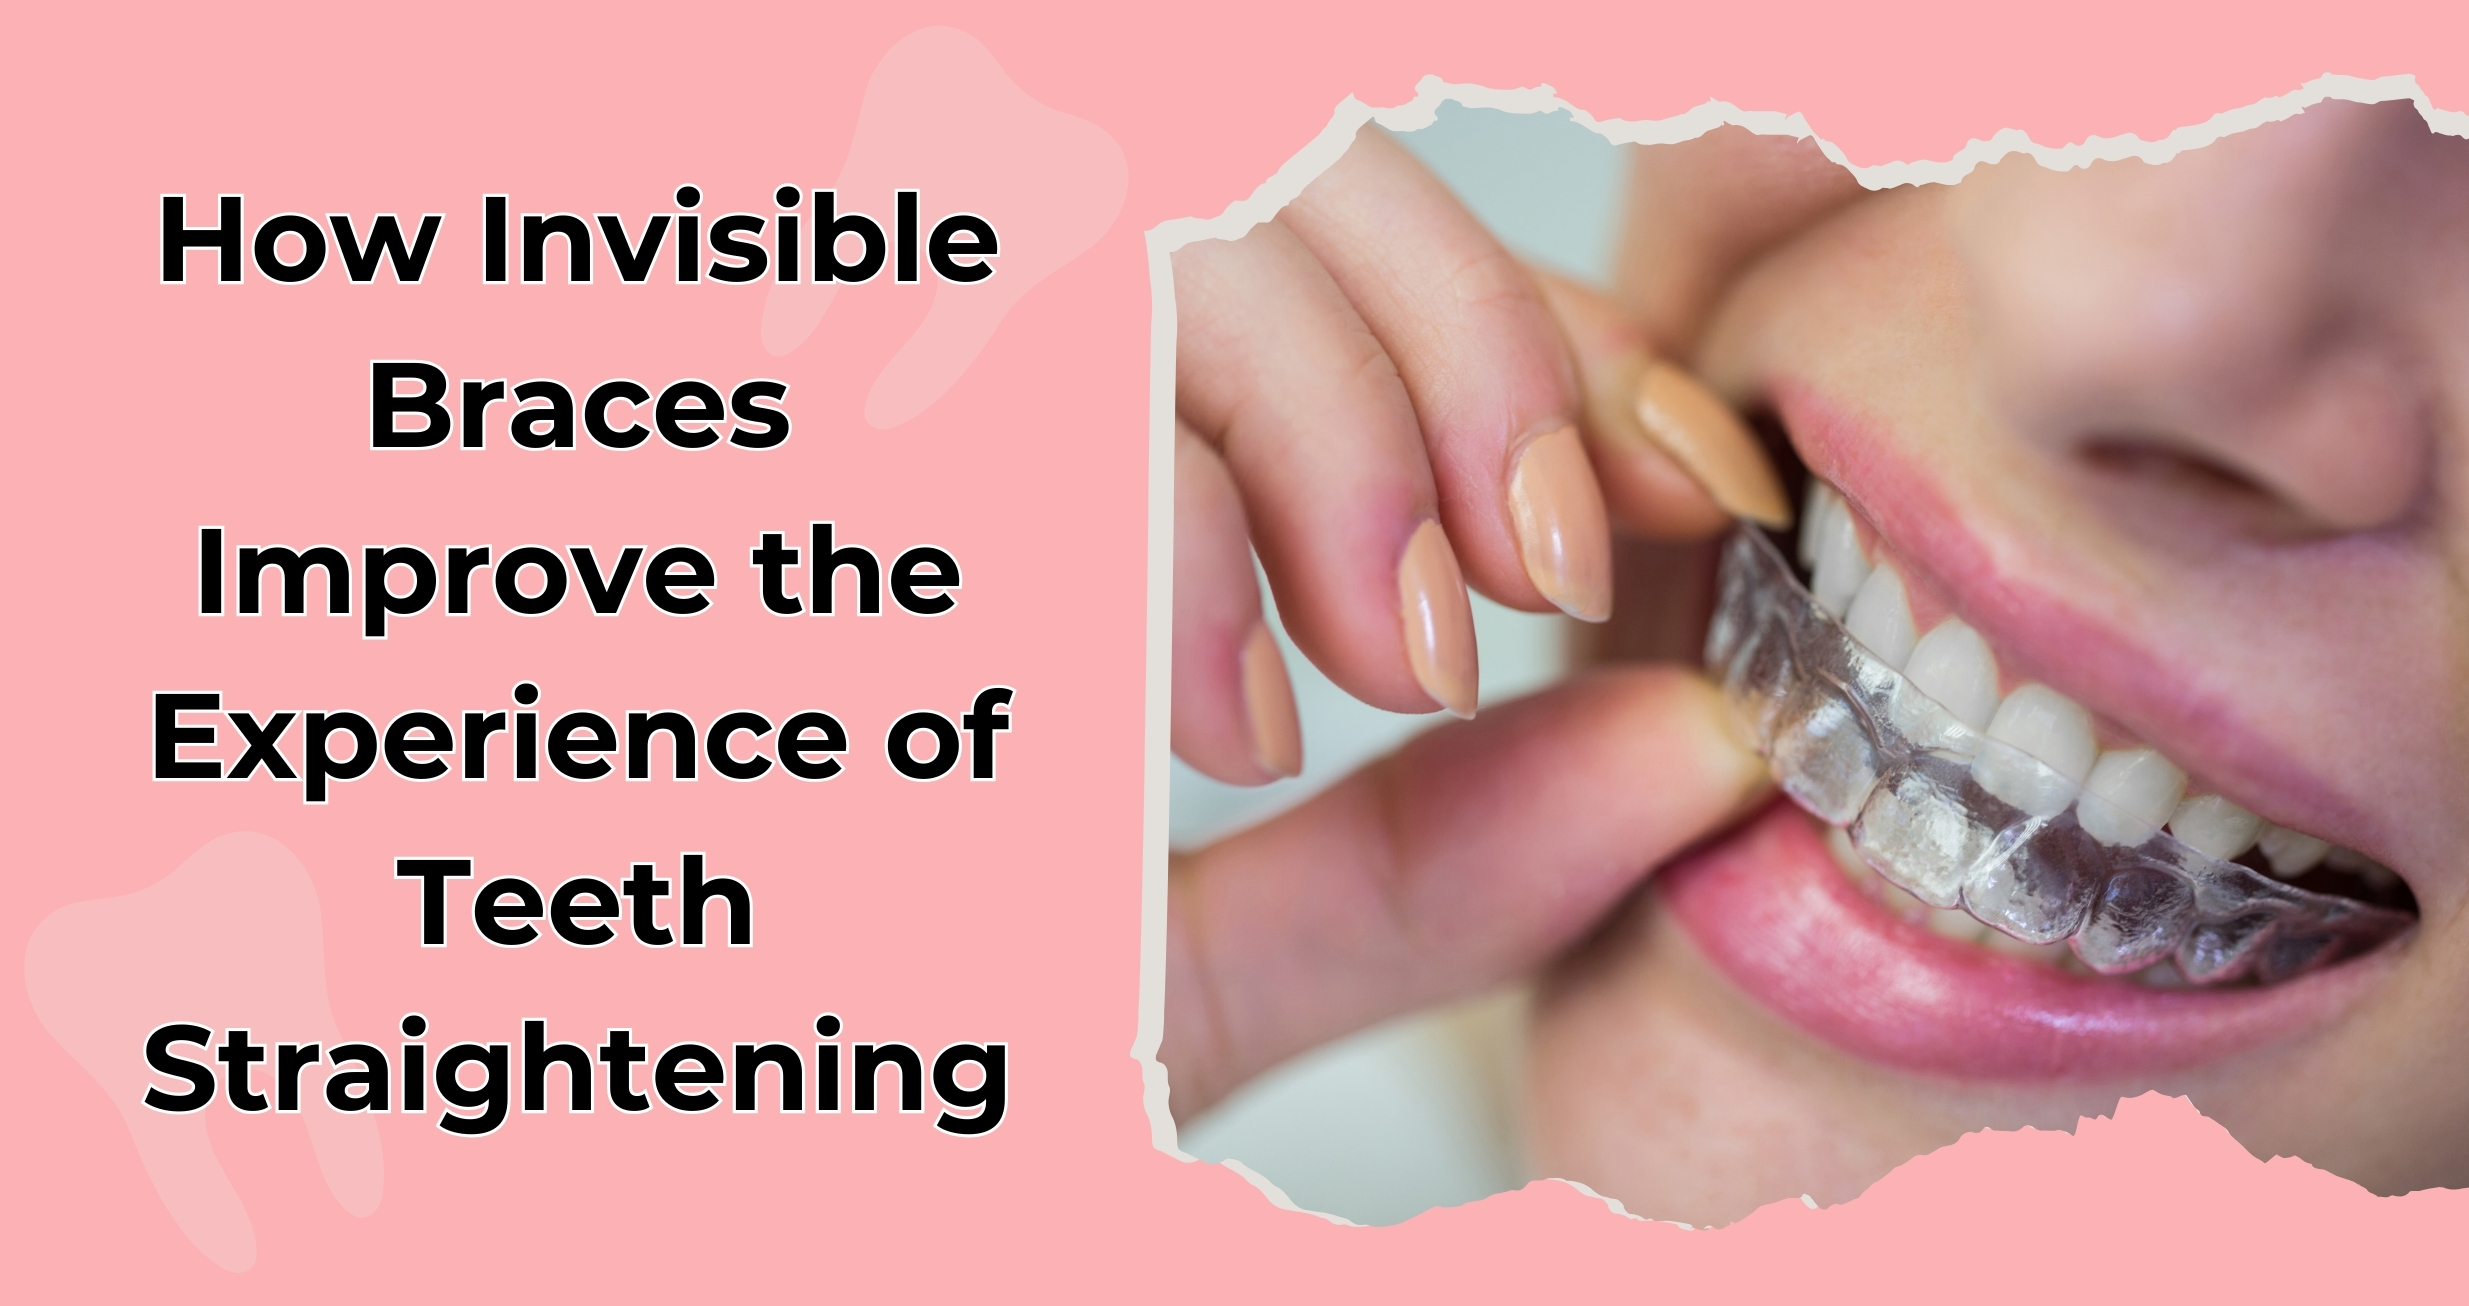 How Invisible Braces Improve the Experience of Teeth Straightening